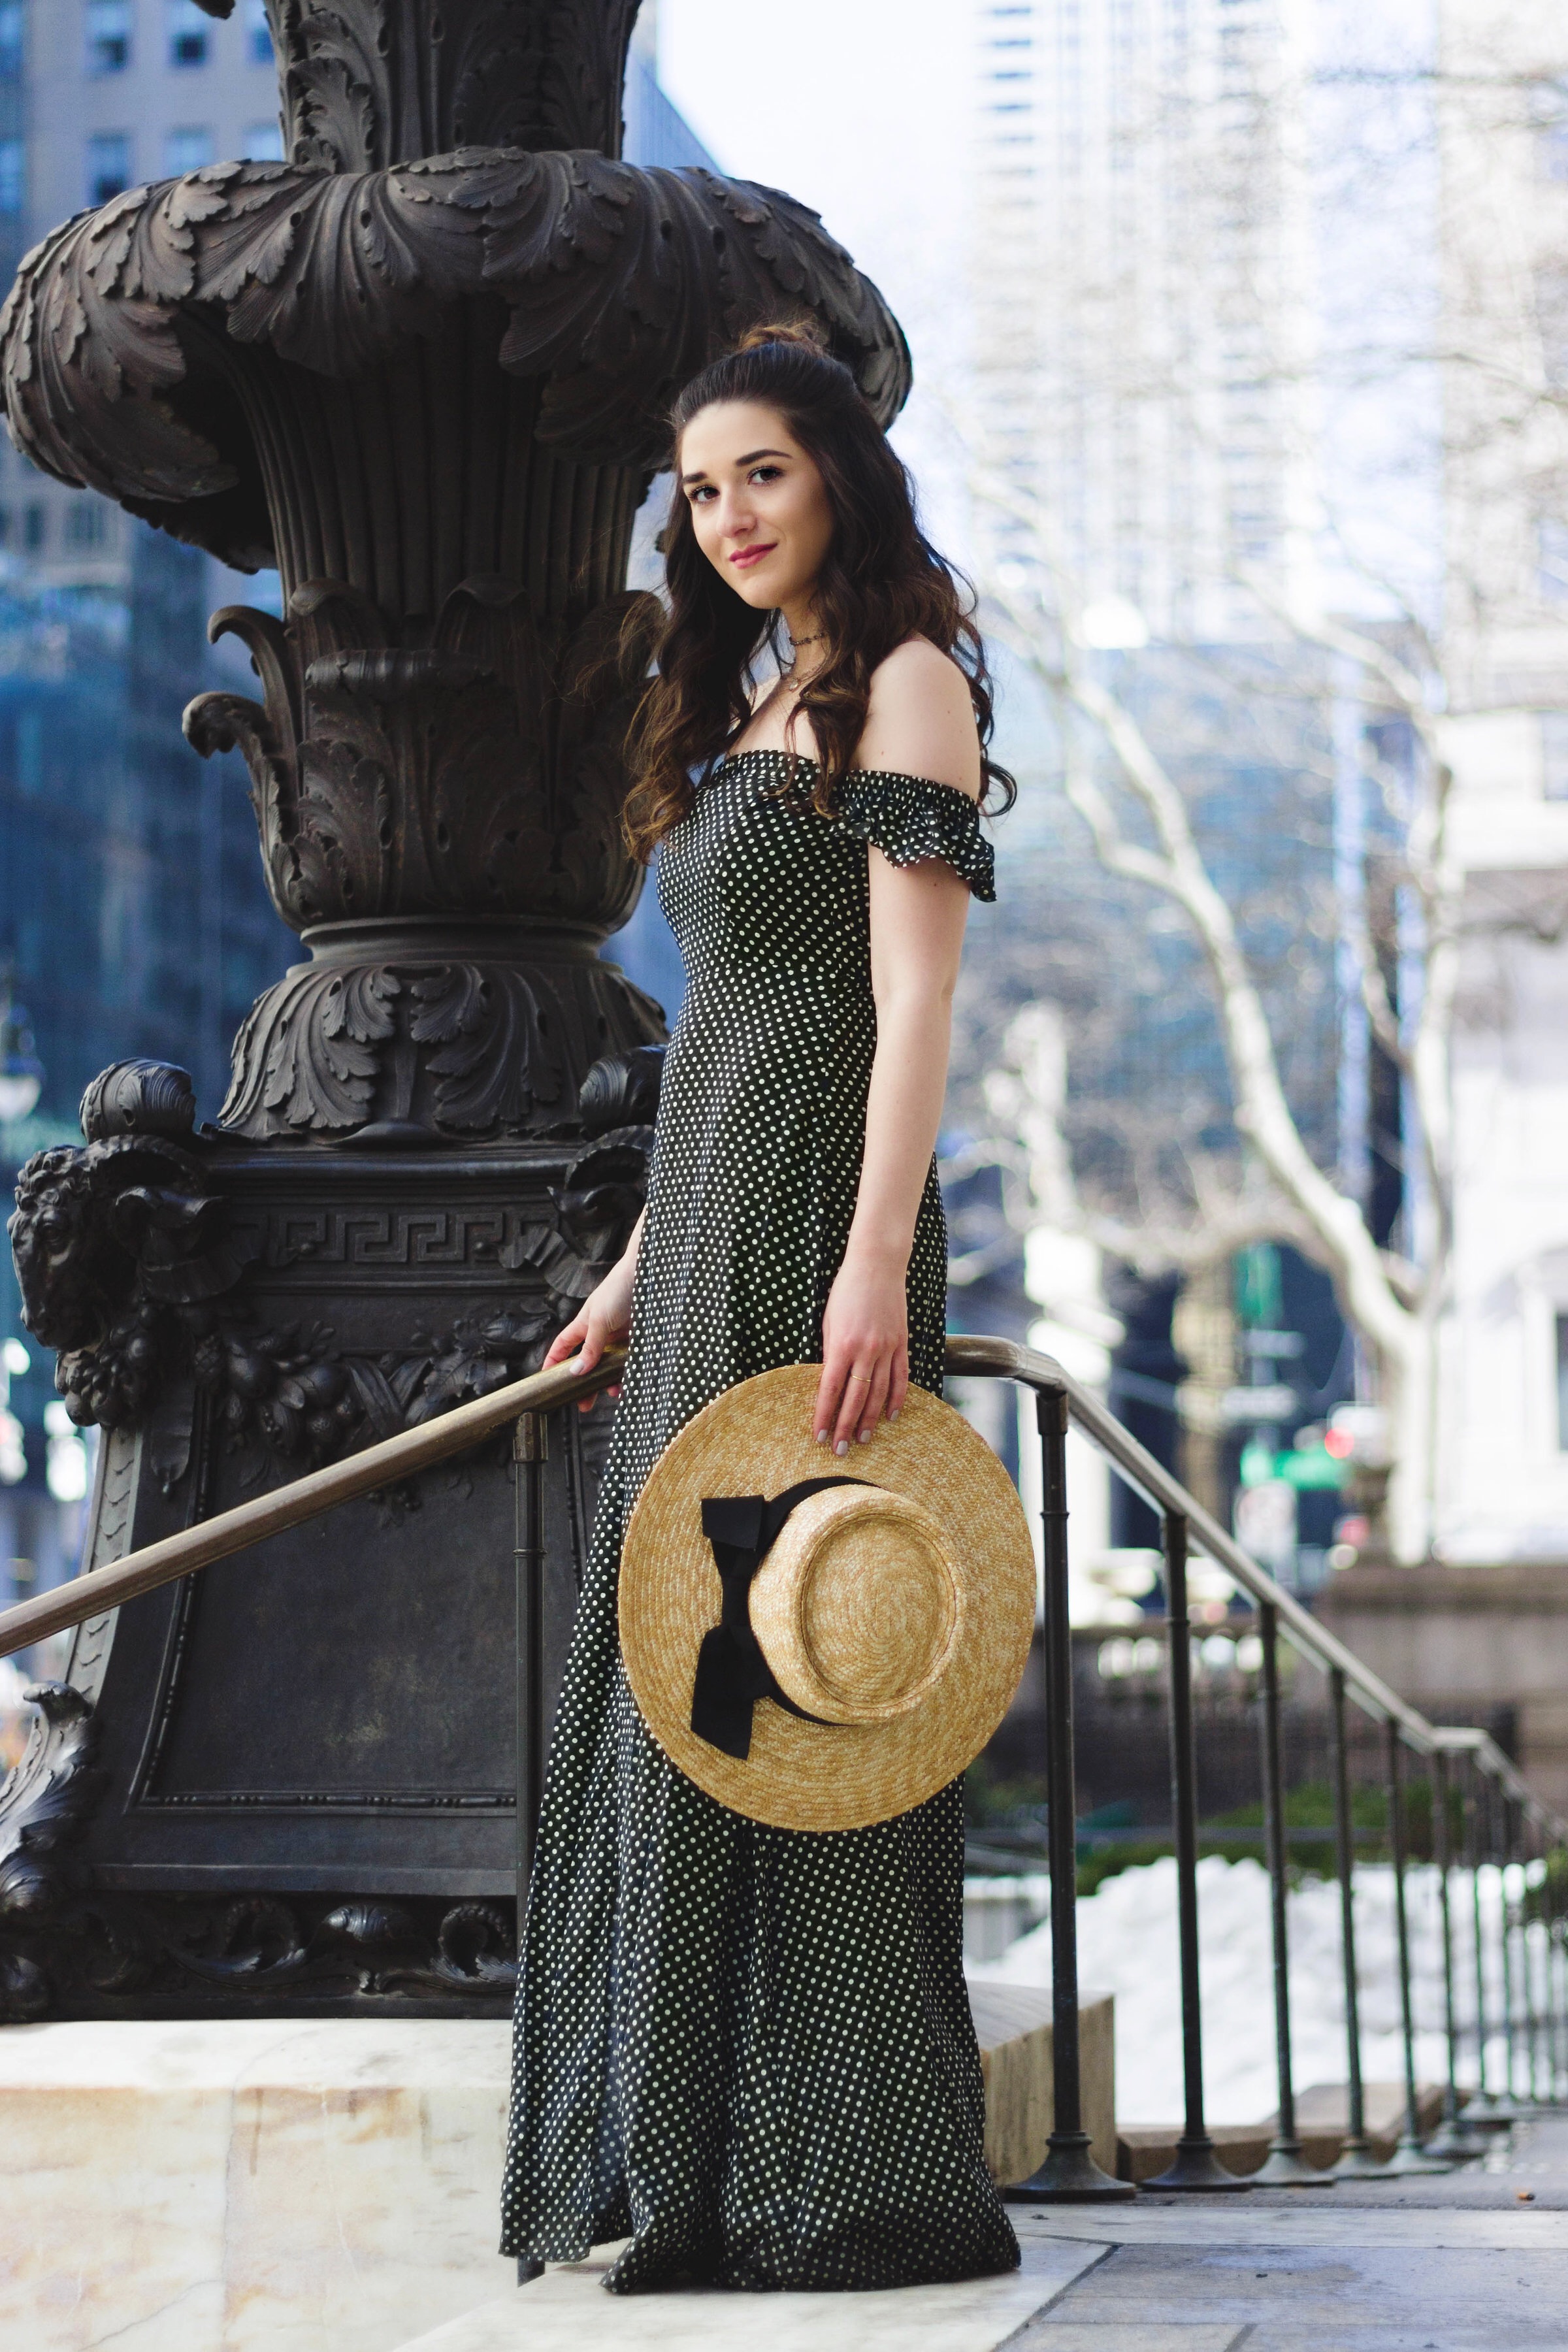 Polka Dot Maxi Dress Beach Hat How To Afford Living In NYC Esther Santer Fashion Blog NYC  Street Style Blogger Outfit OOTD Trendy Topknot Girl Women Feminine Summer Look Cold Shoulder New York City Chokers Ela Rae Jewelry Accessories Lulus Giovannio.jpg